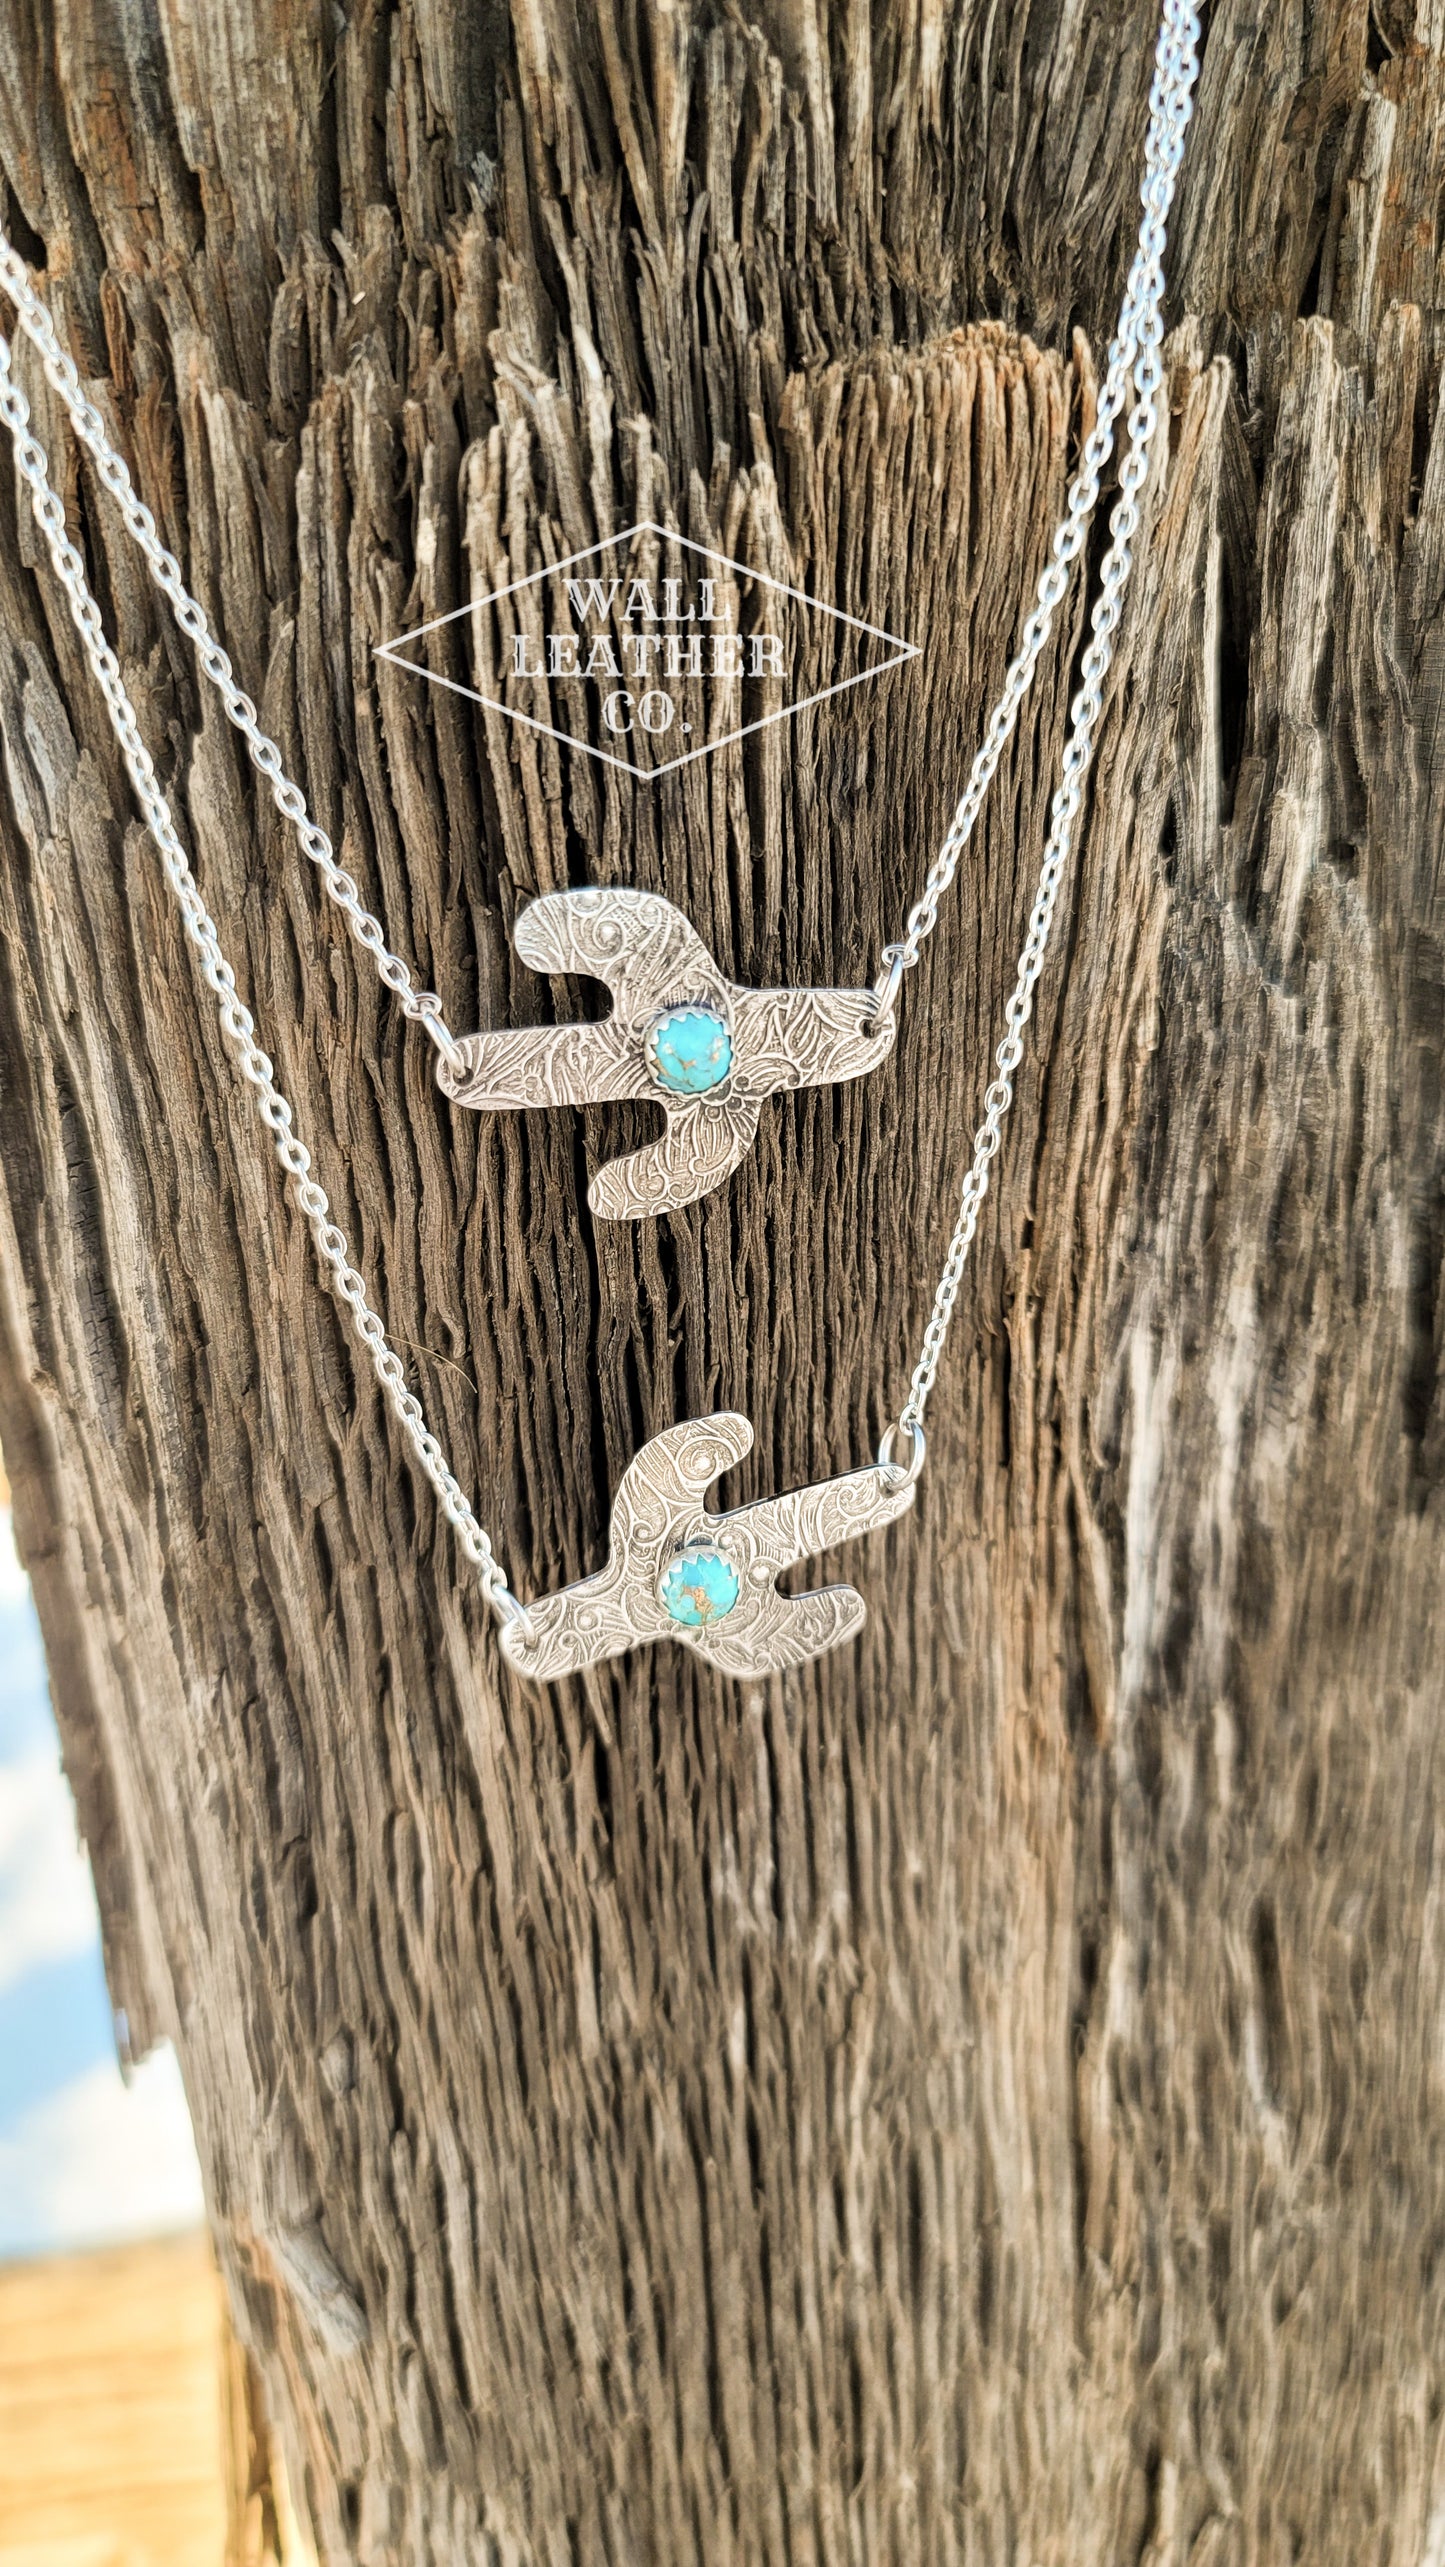 Tarnished Cactus Necklace with Turquoise